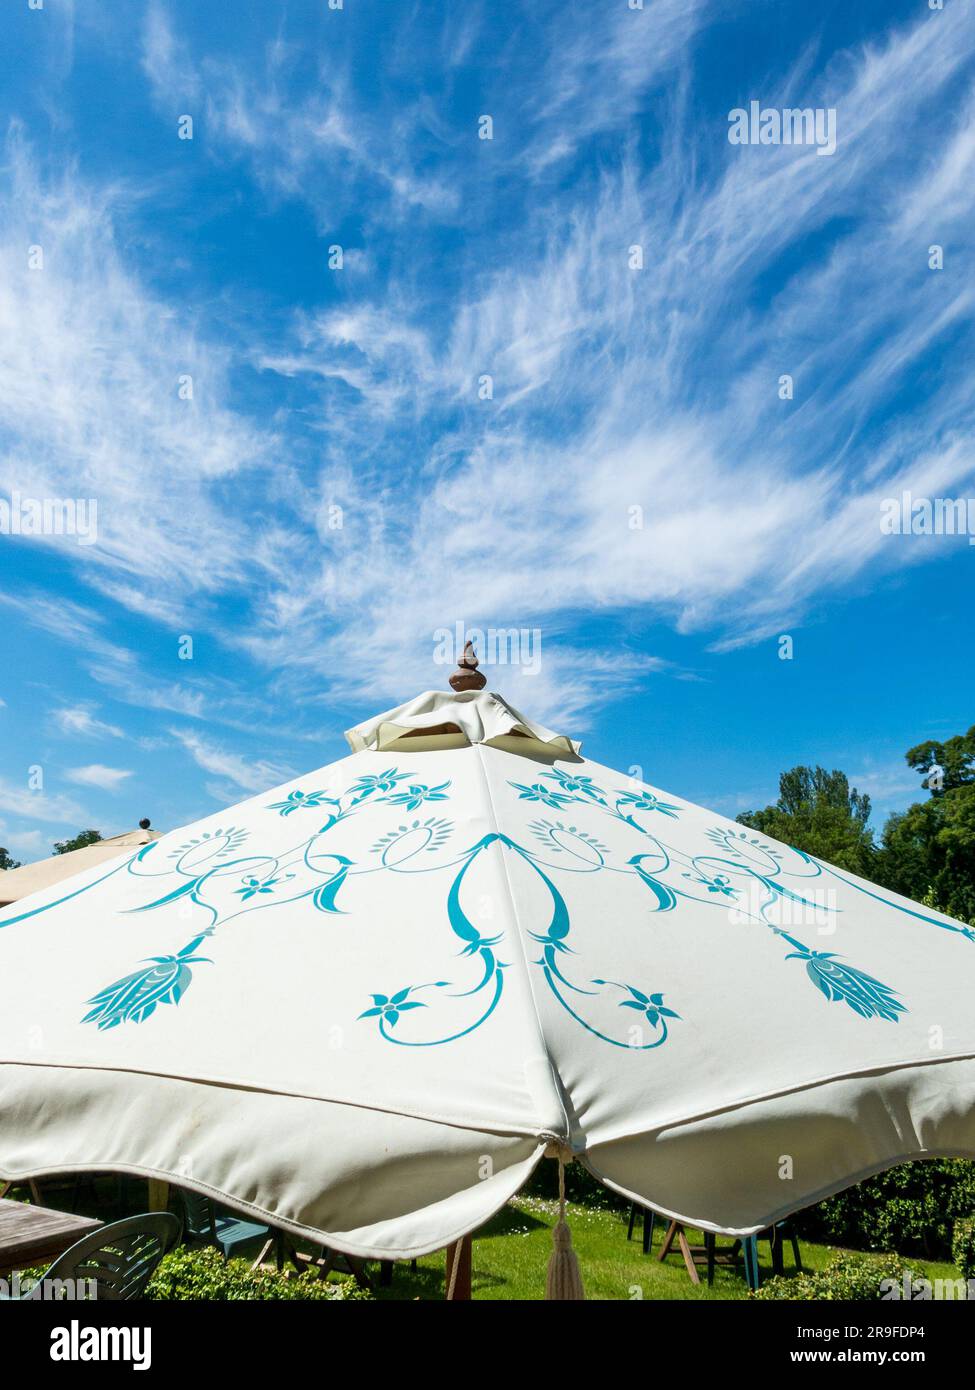 Sunlit garden parasol with blue sky and wisps of white high cirrus clouds above, England, UK Stock Photo